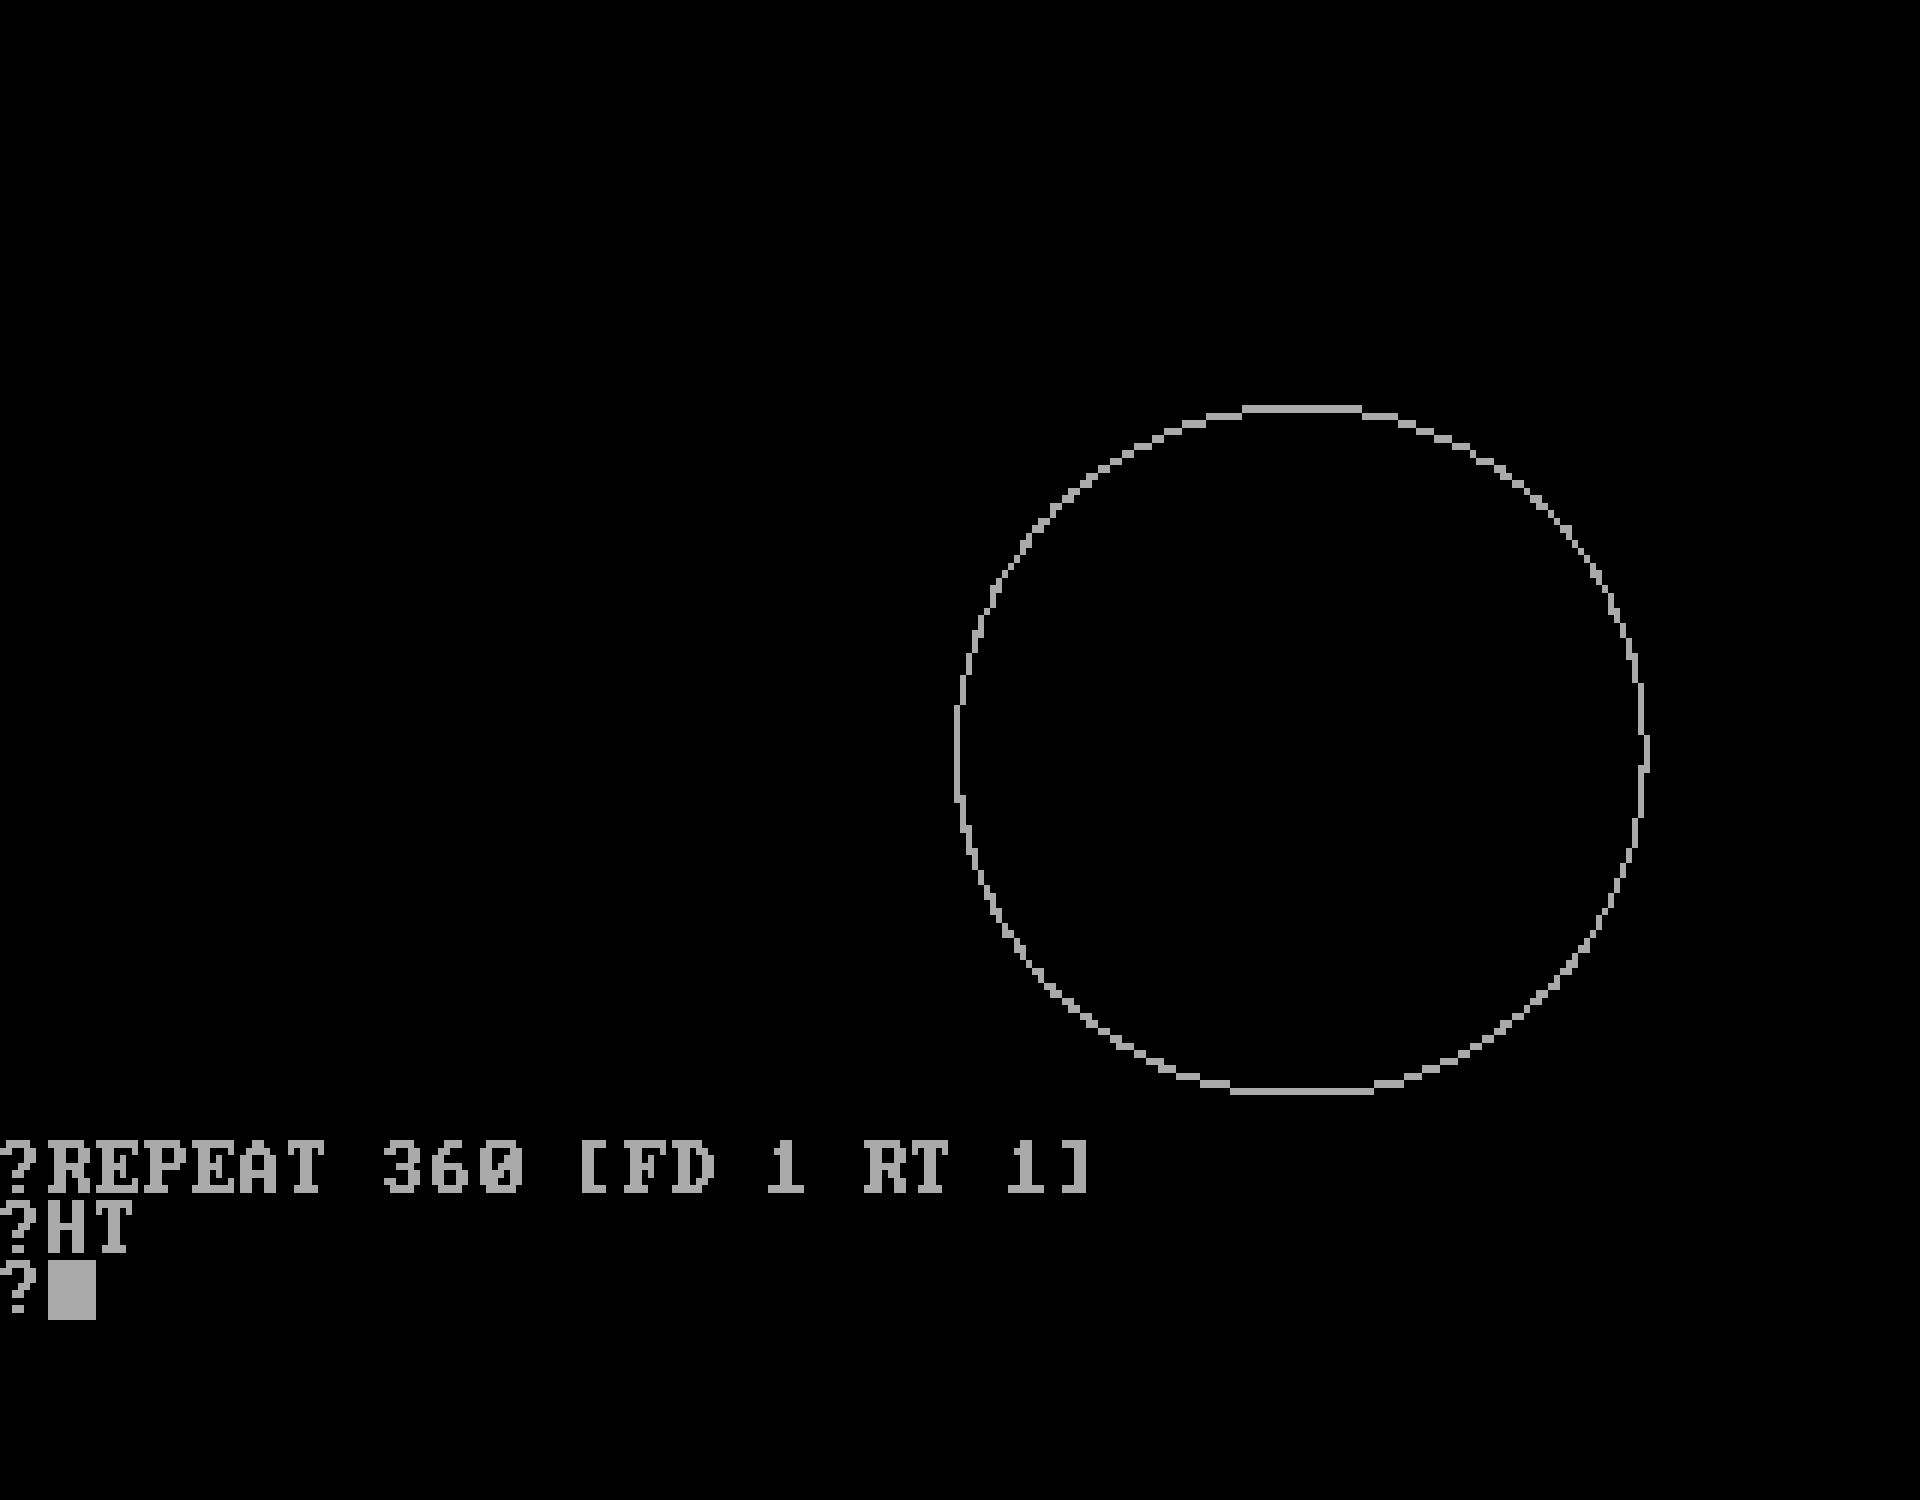 A circle drawn with Logo along with source code